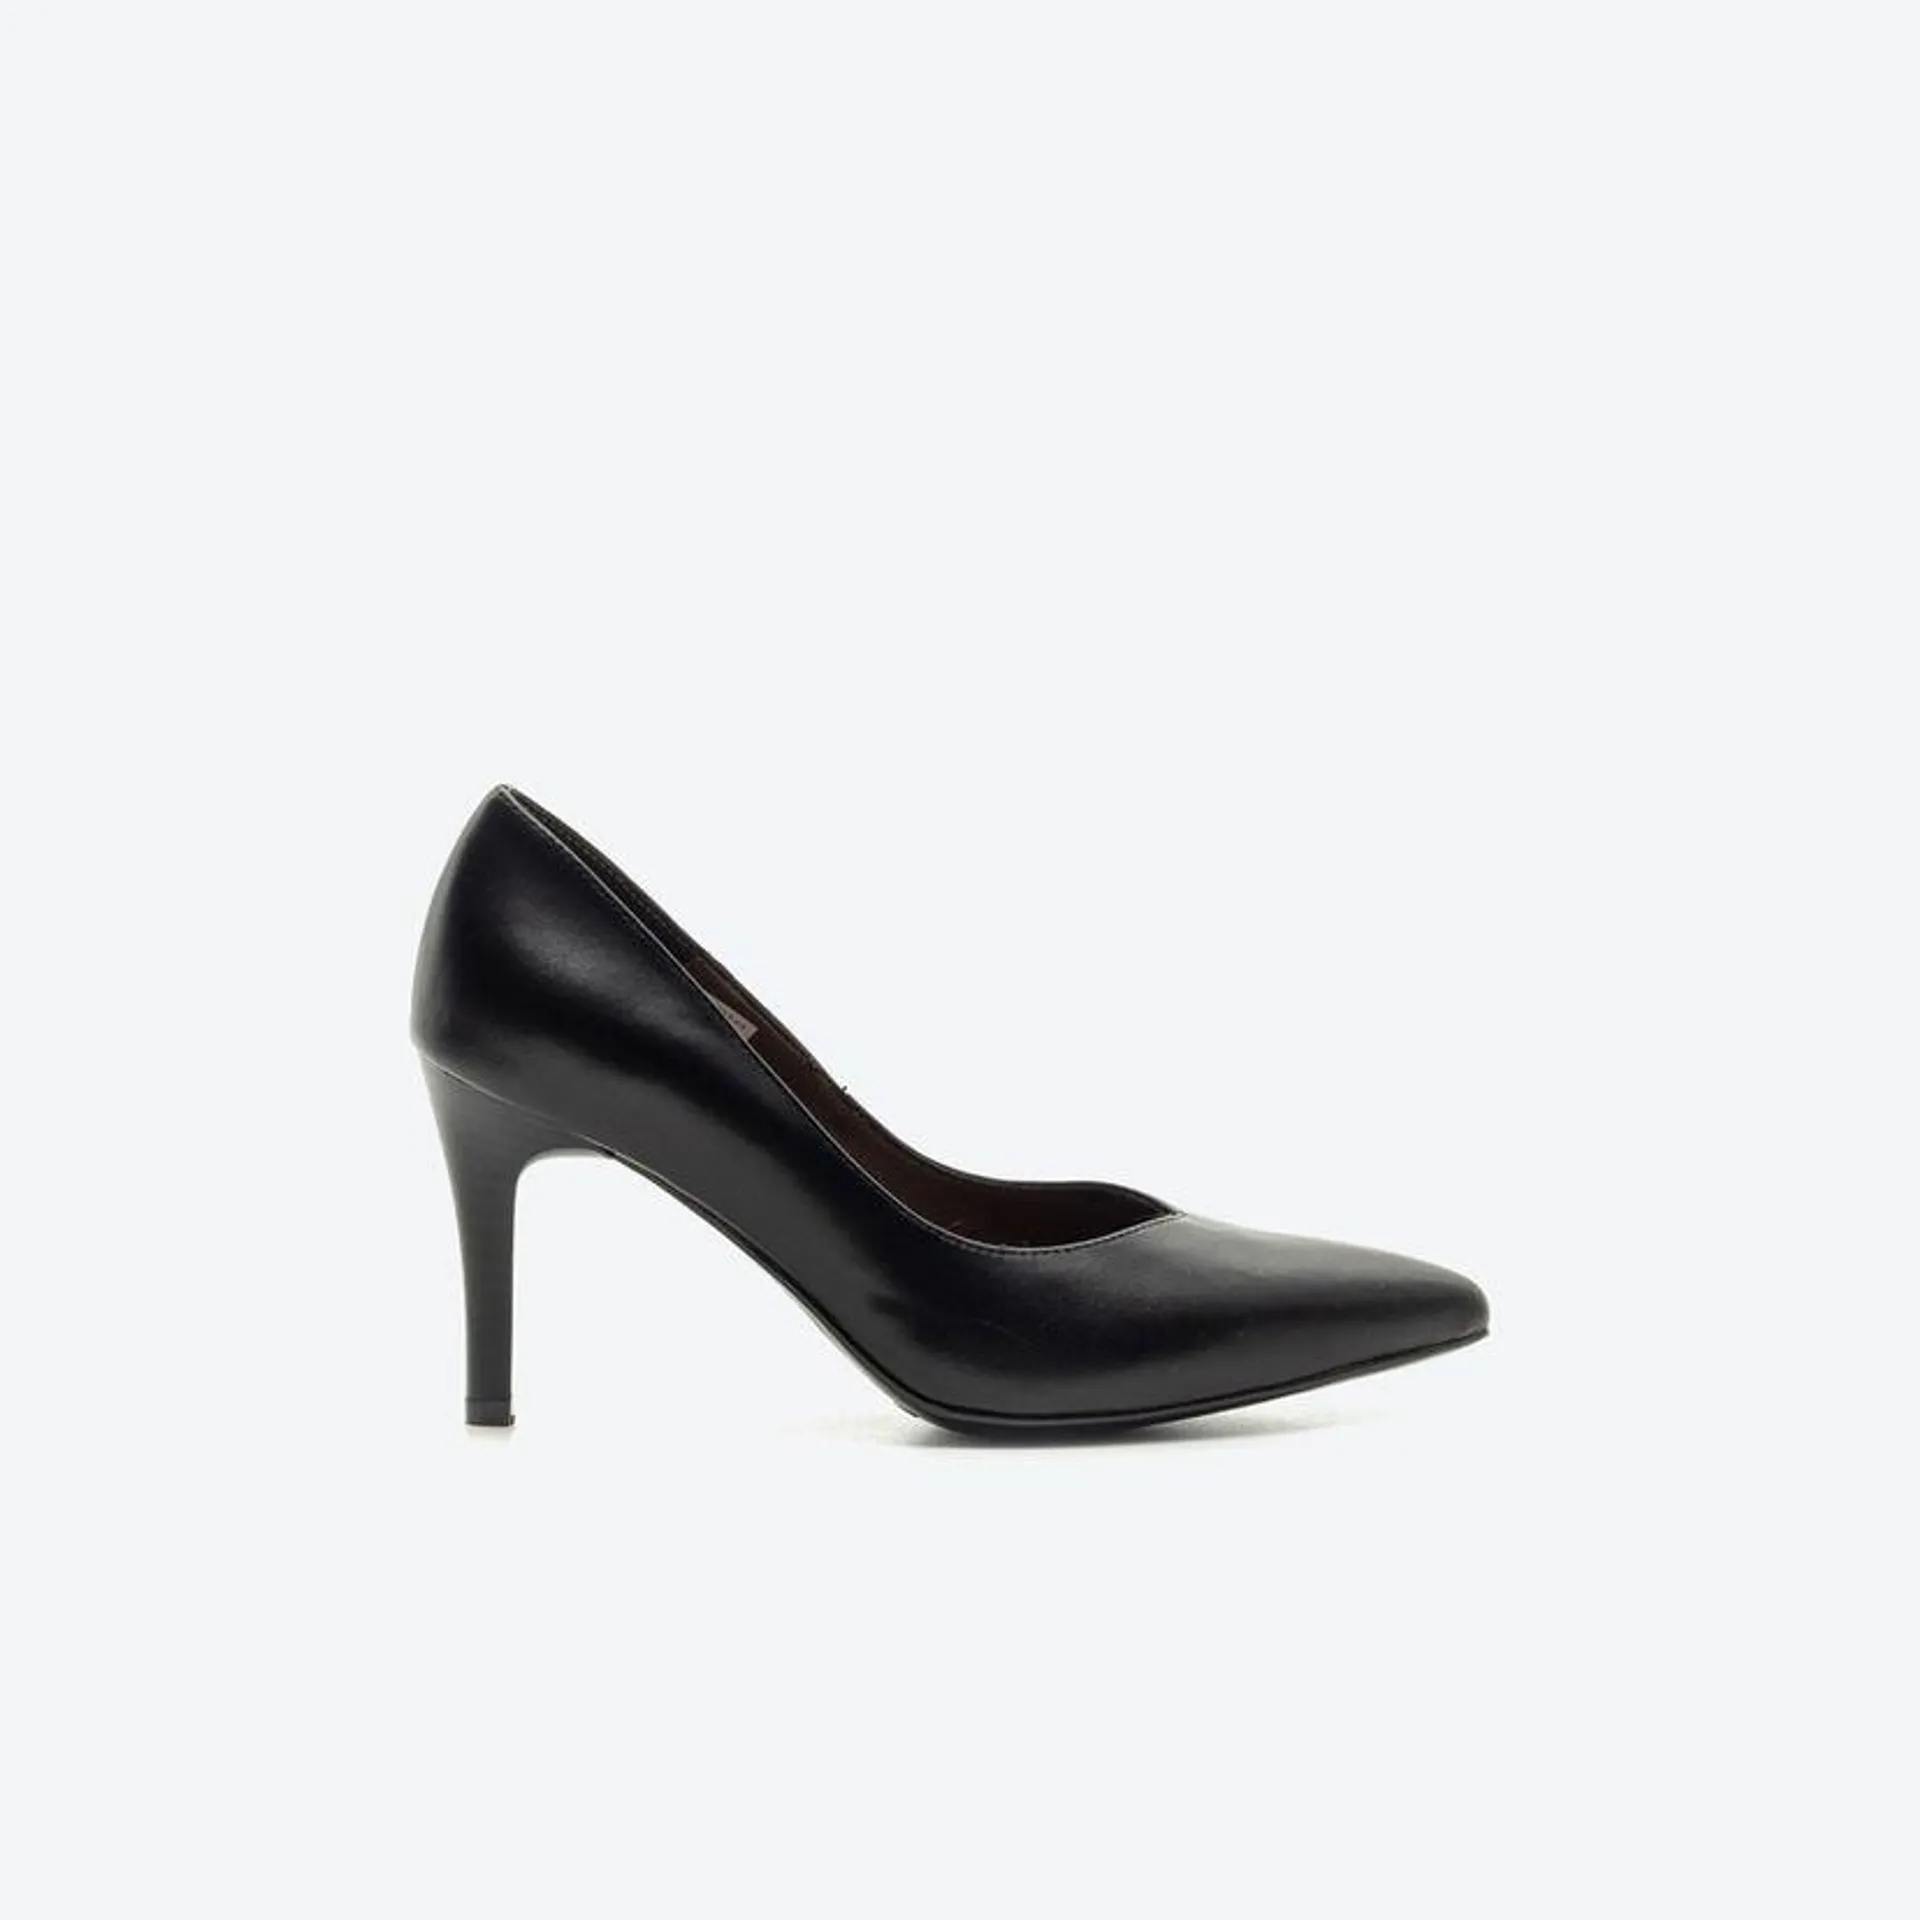 Tacones Casuales Mujer Freeport Z1g5 Negro